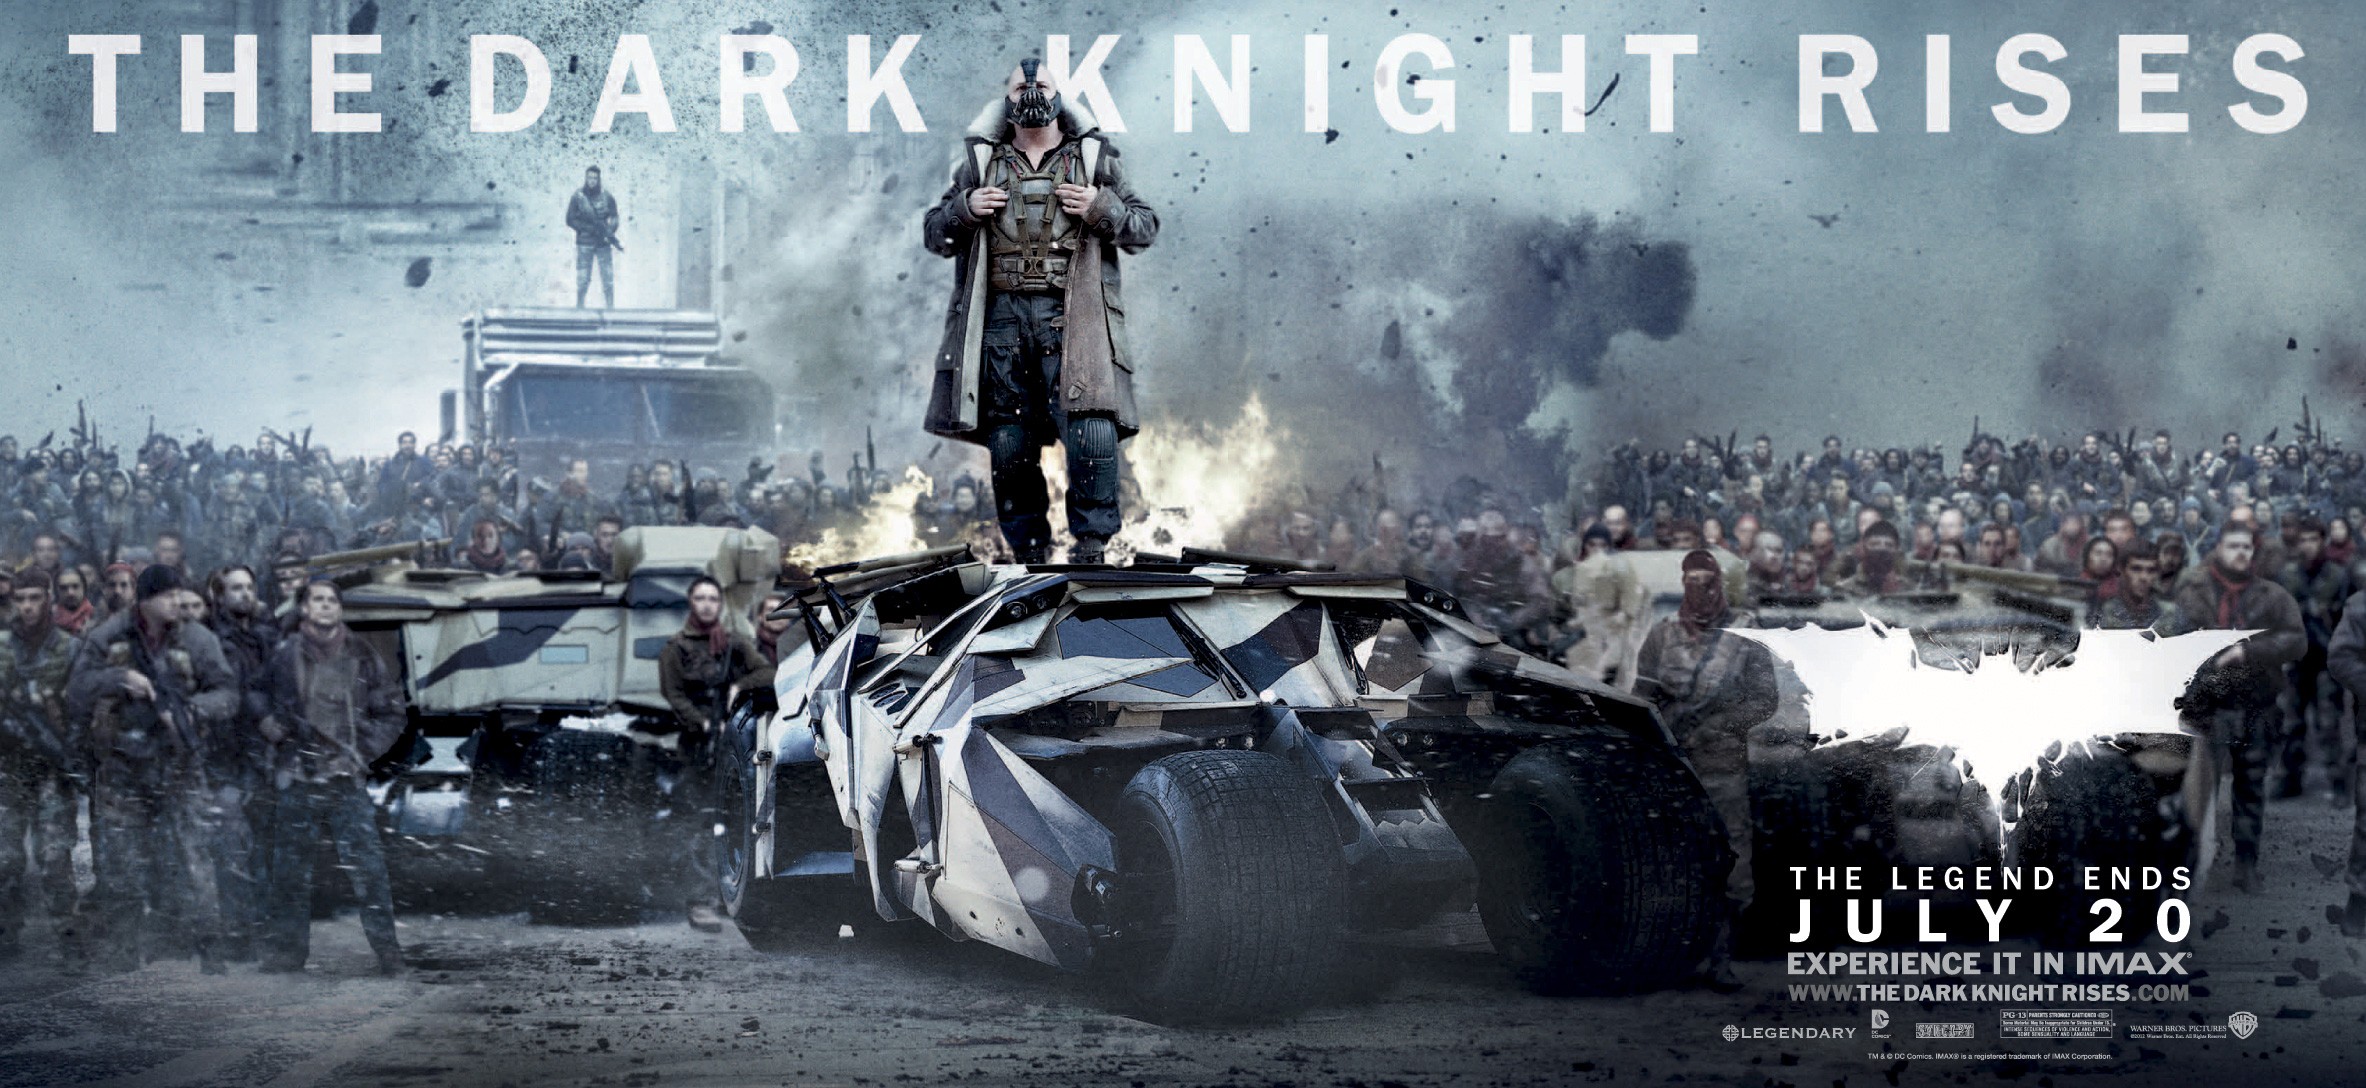 Mega Sized Movie Poster Image for The Dark Knight Rises (#12 of 24)